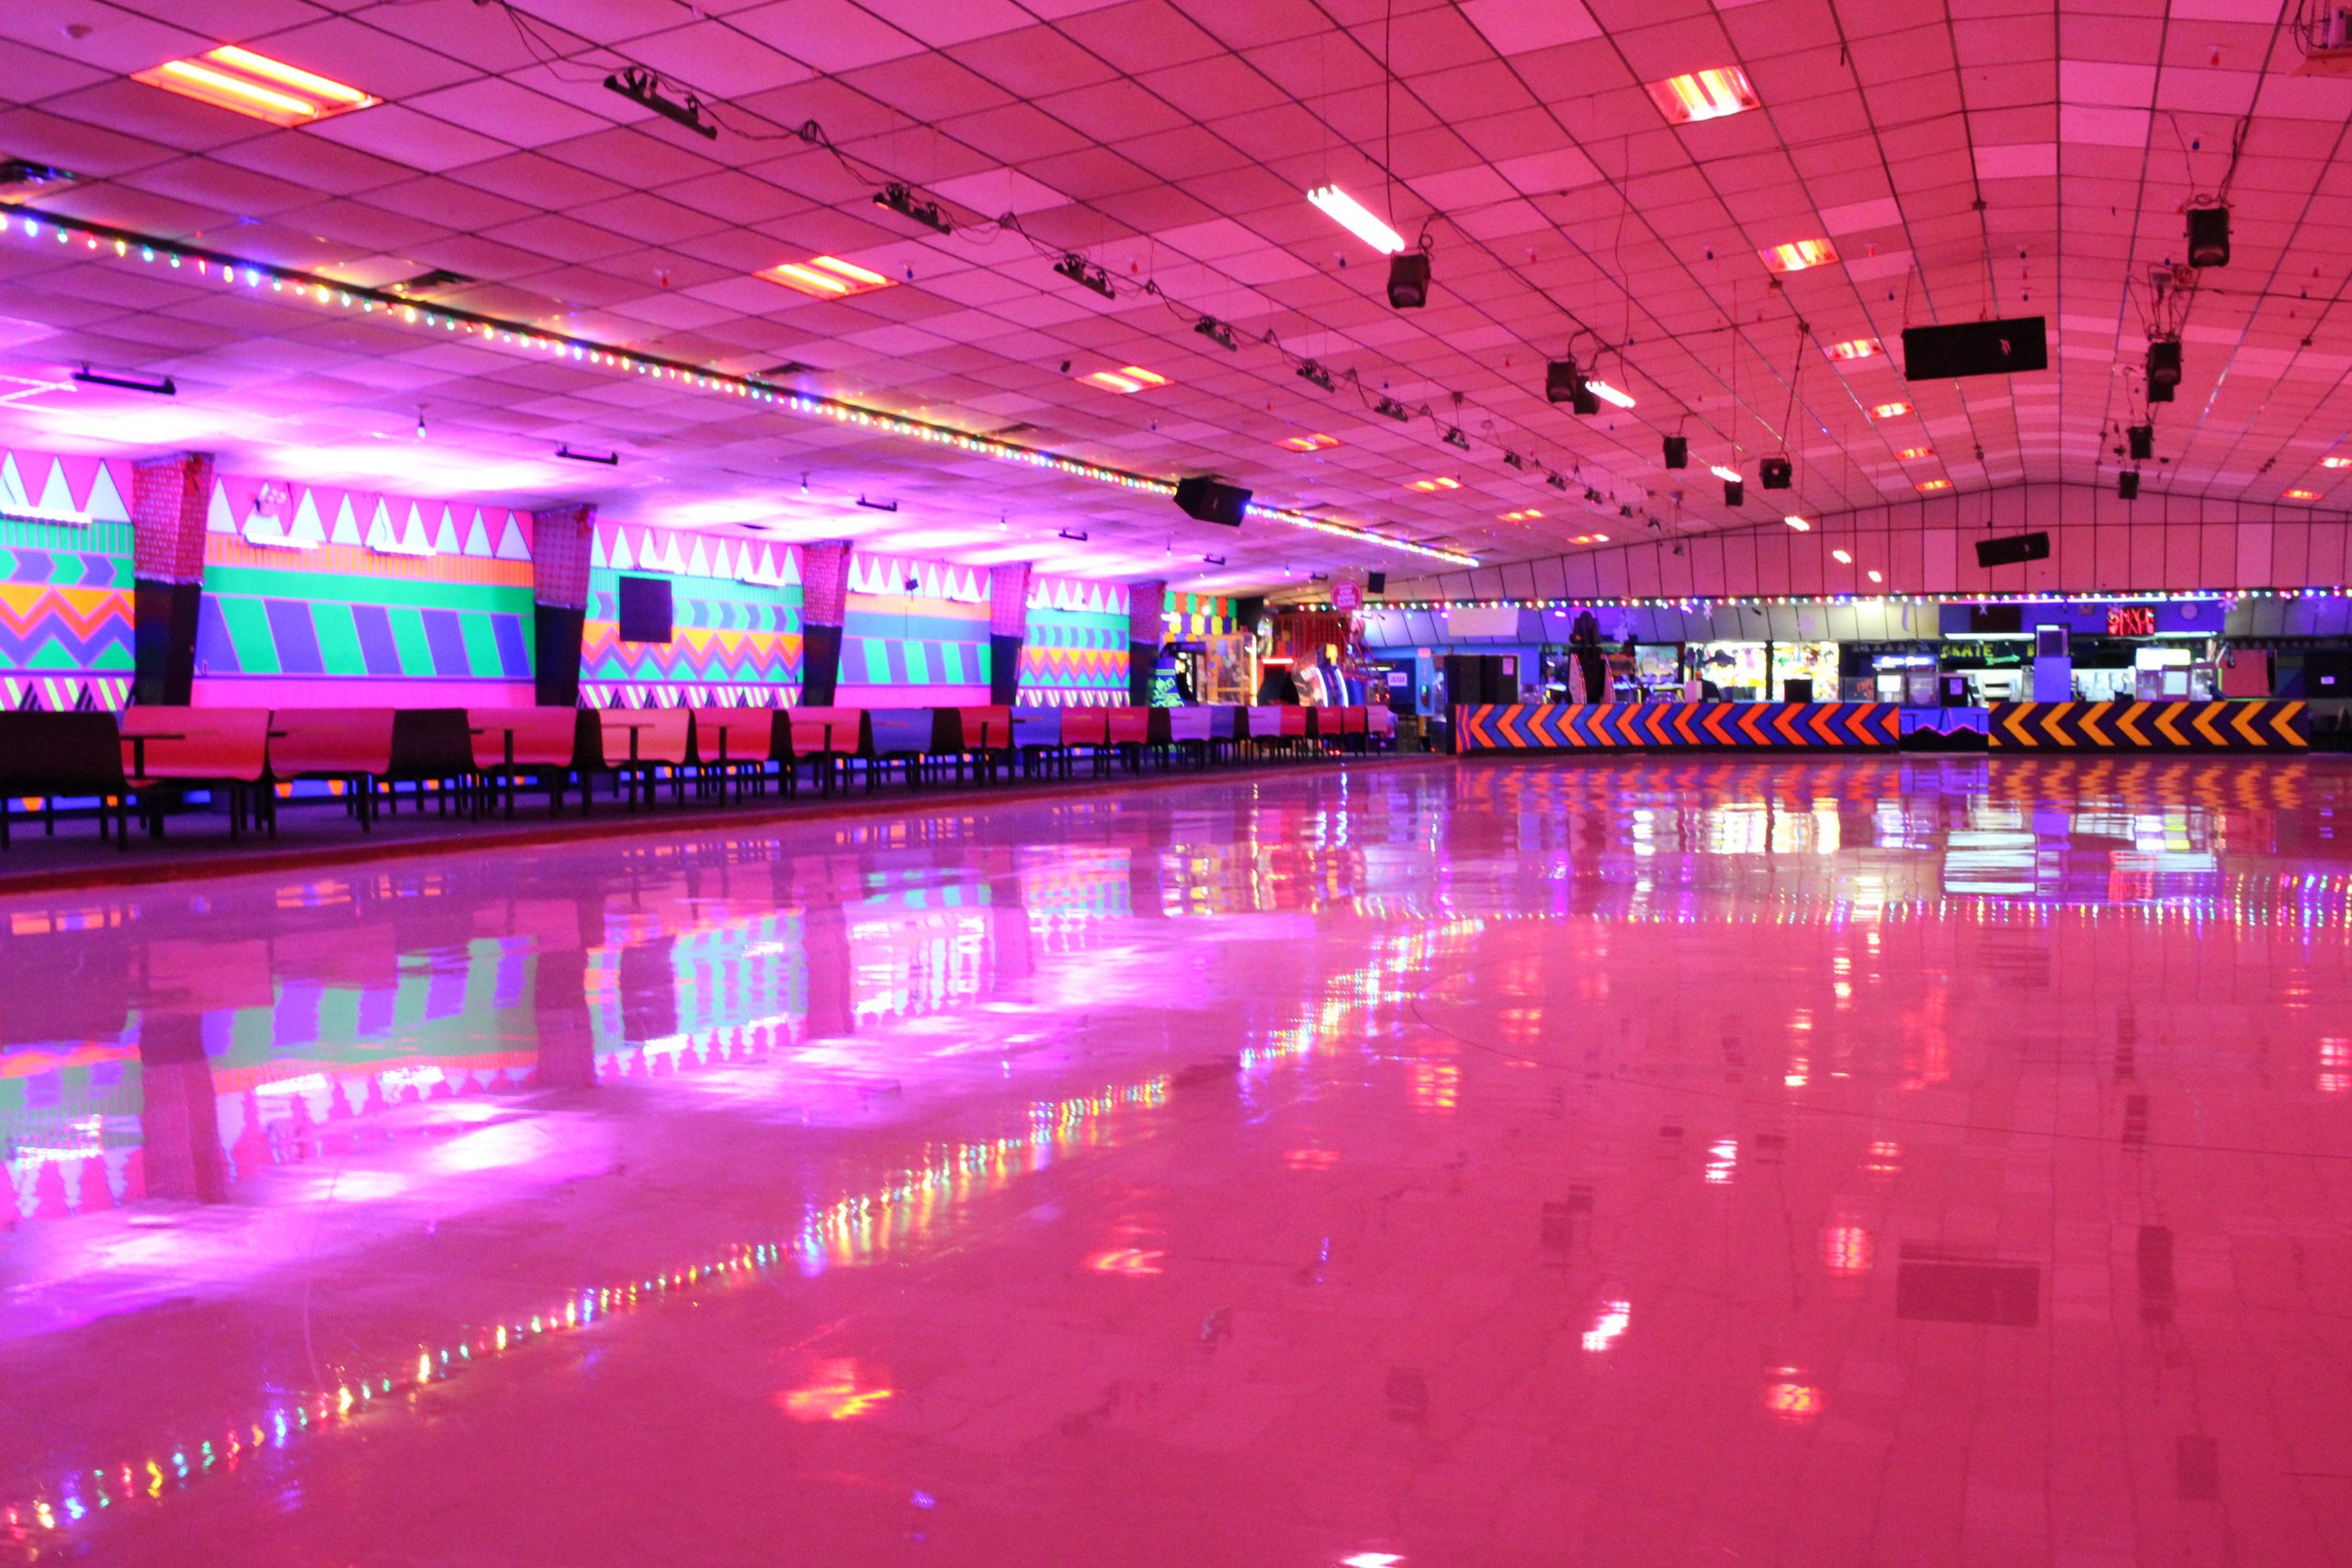 View of the spacious roller skating floor, a favorite spot for summer camp field trips at Roller Kingdom.